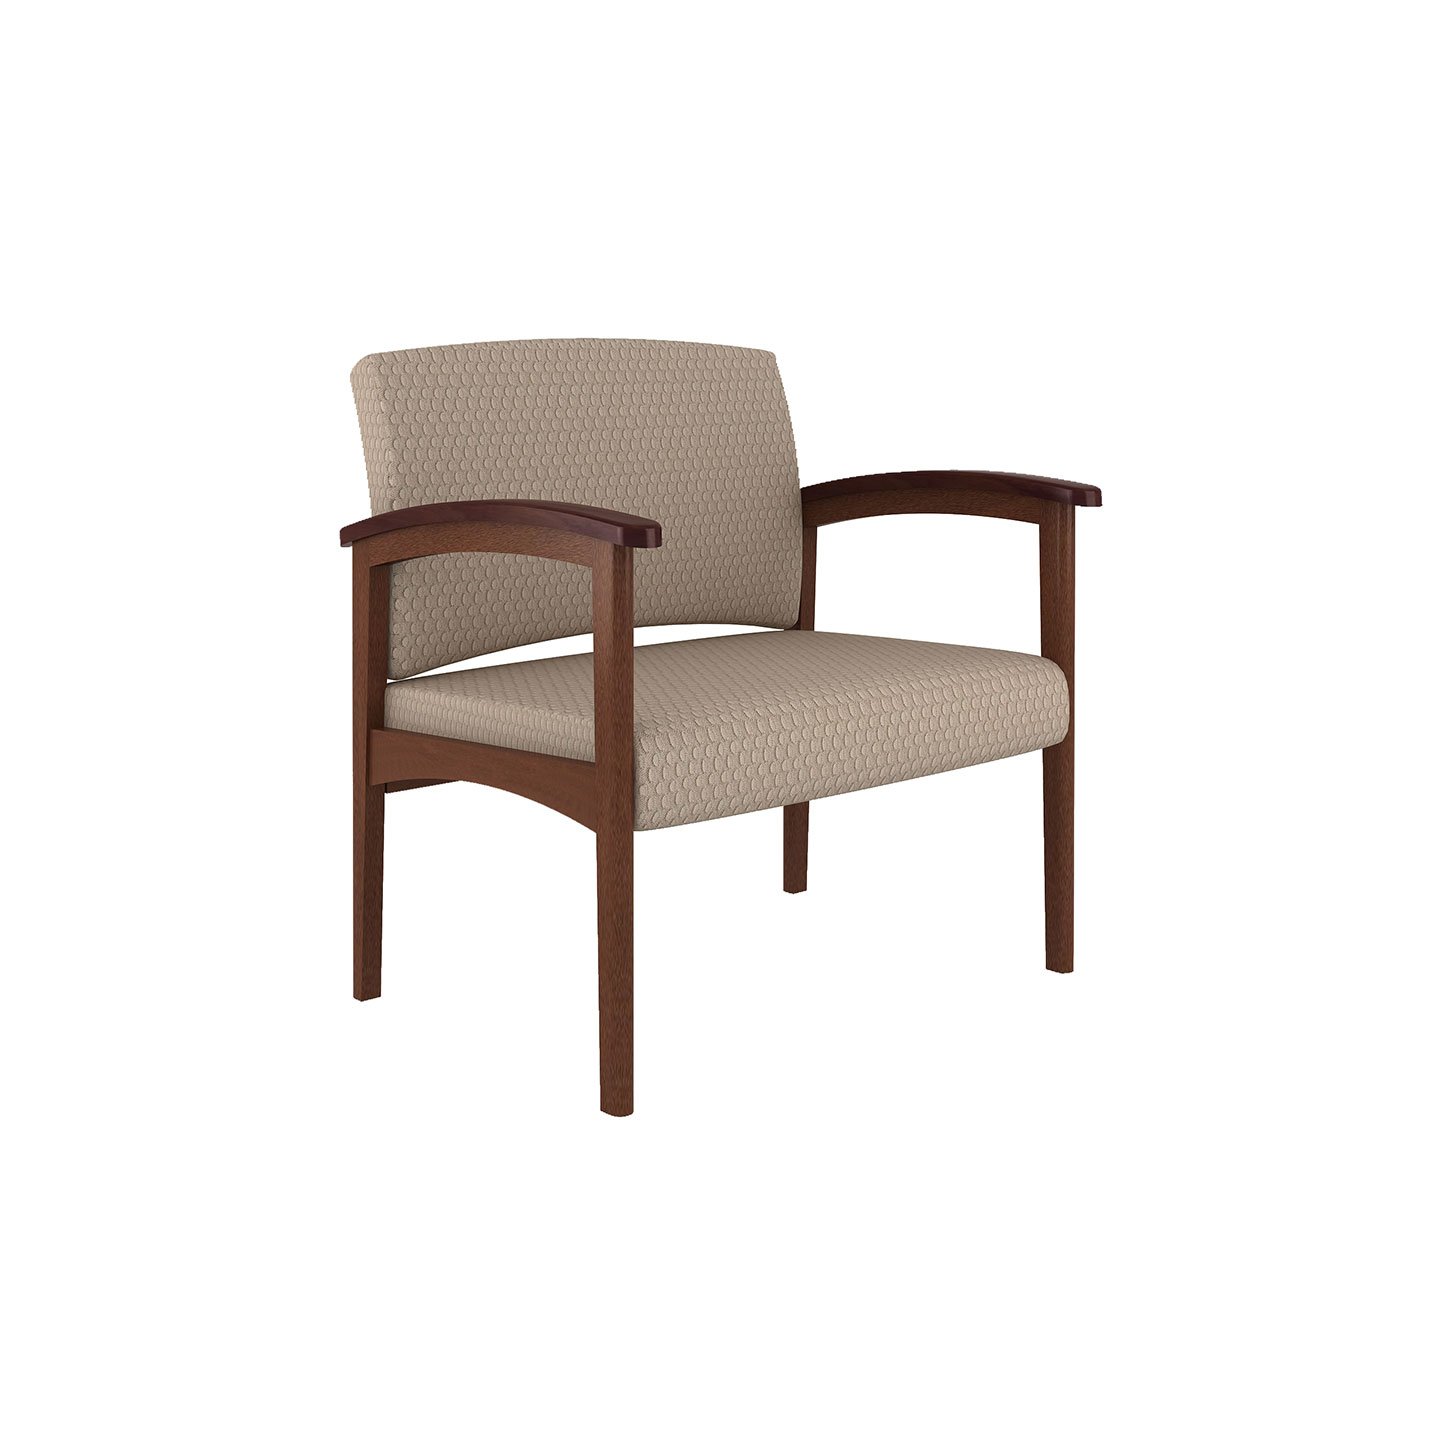 Haworth Conover Bariatric chair in light brown fabric an dark wooden structure